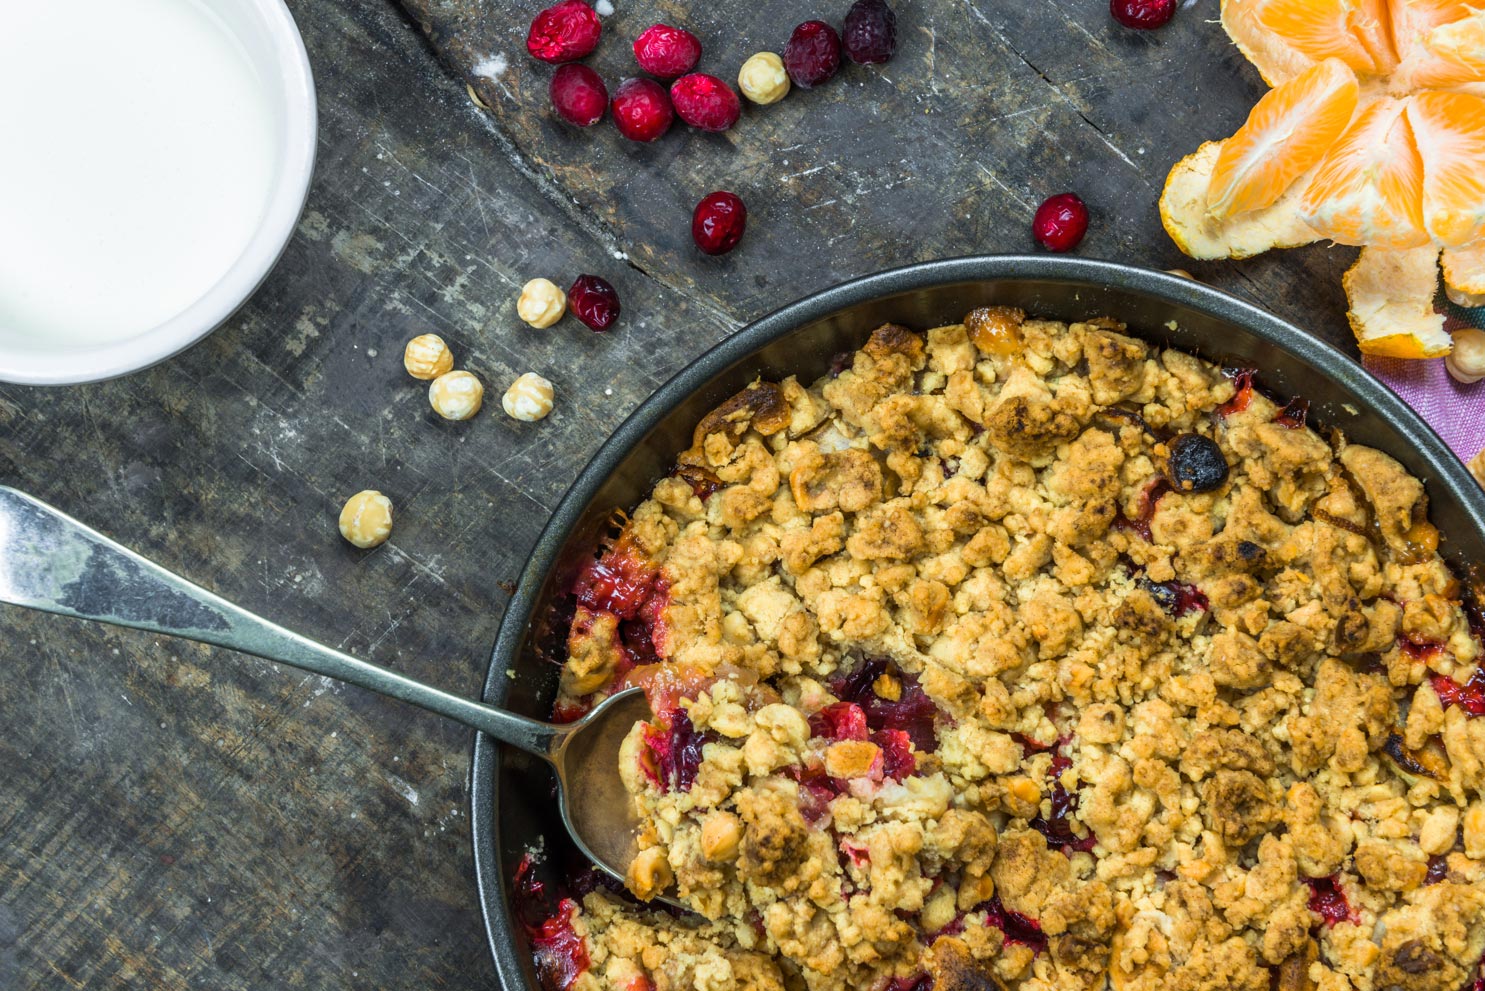 Cranberry Crumble Coffee Cake - This Takes the Cake as a Perfect Start or Finish to a Holiday Celebration!